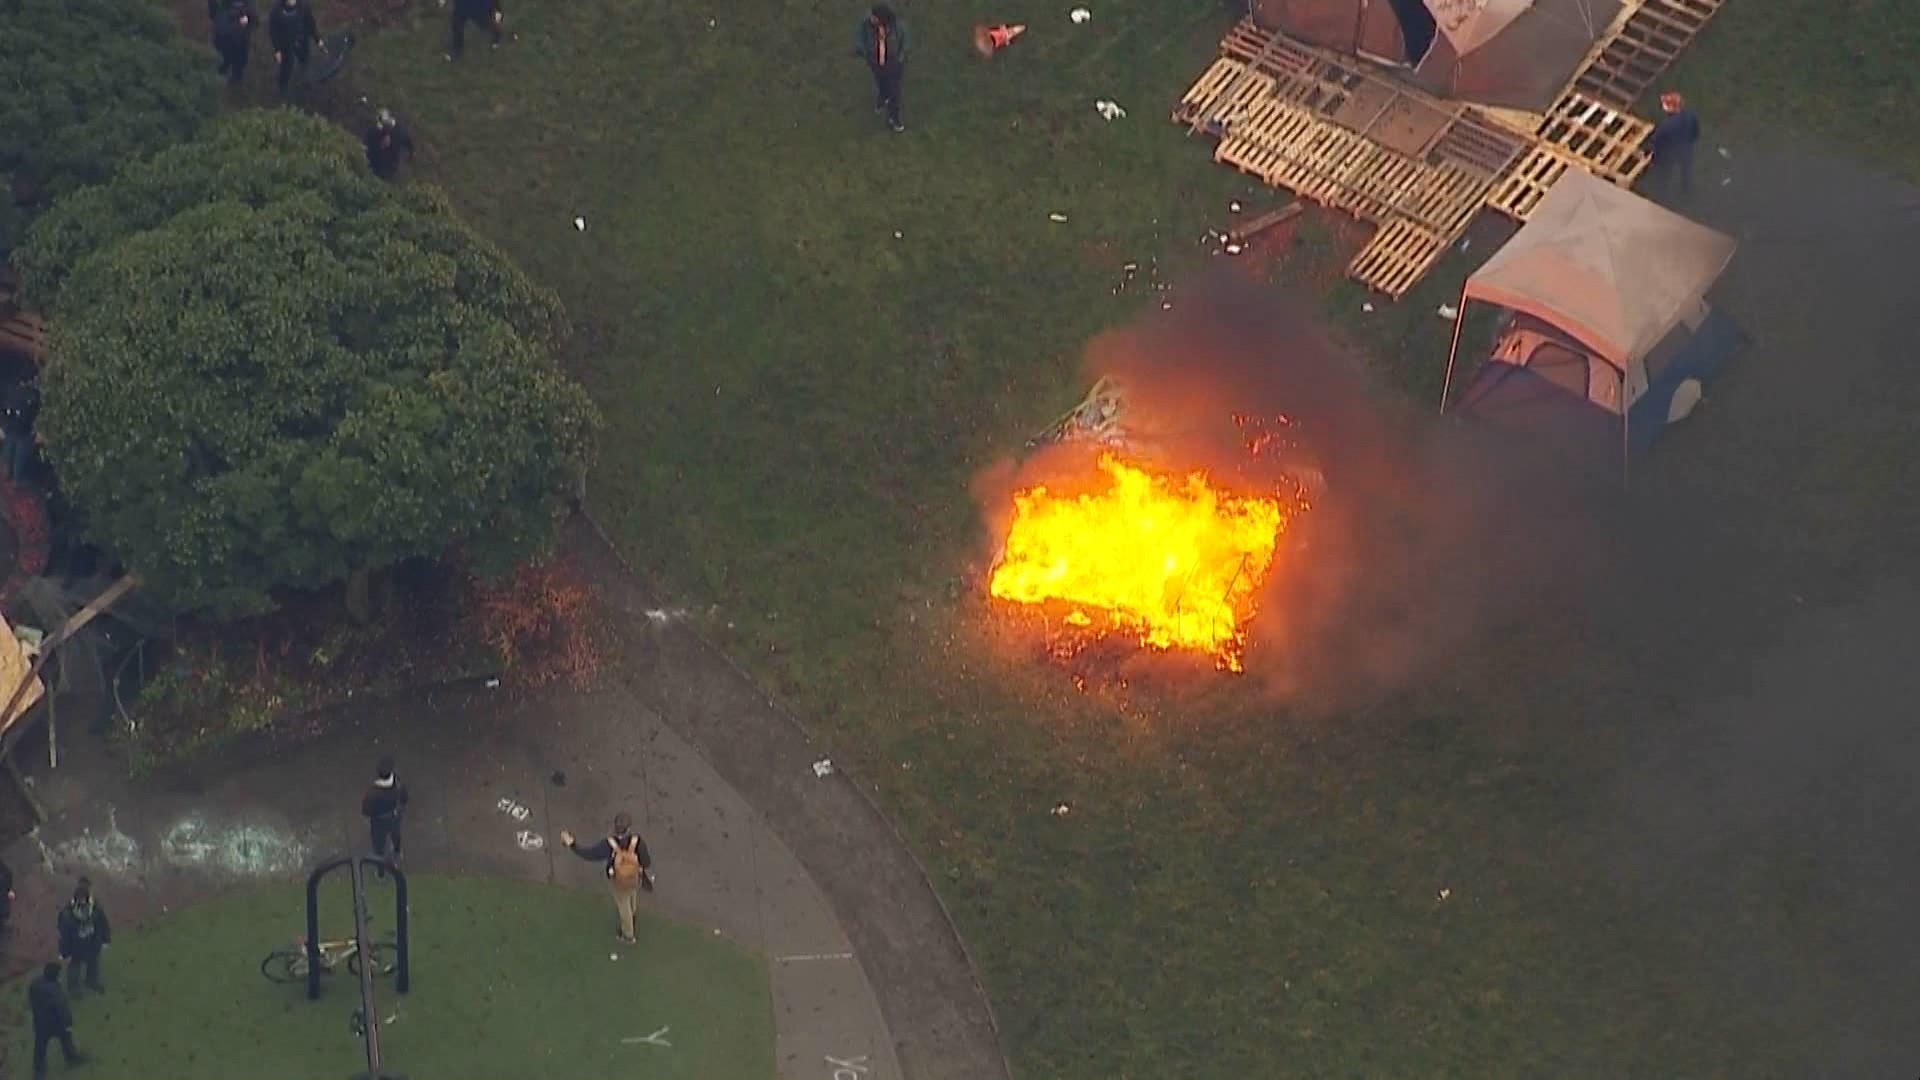 Protesters set a fire while resisting the cleanout of a homeless encampment at Cal Anderson Park